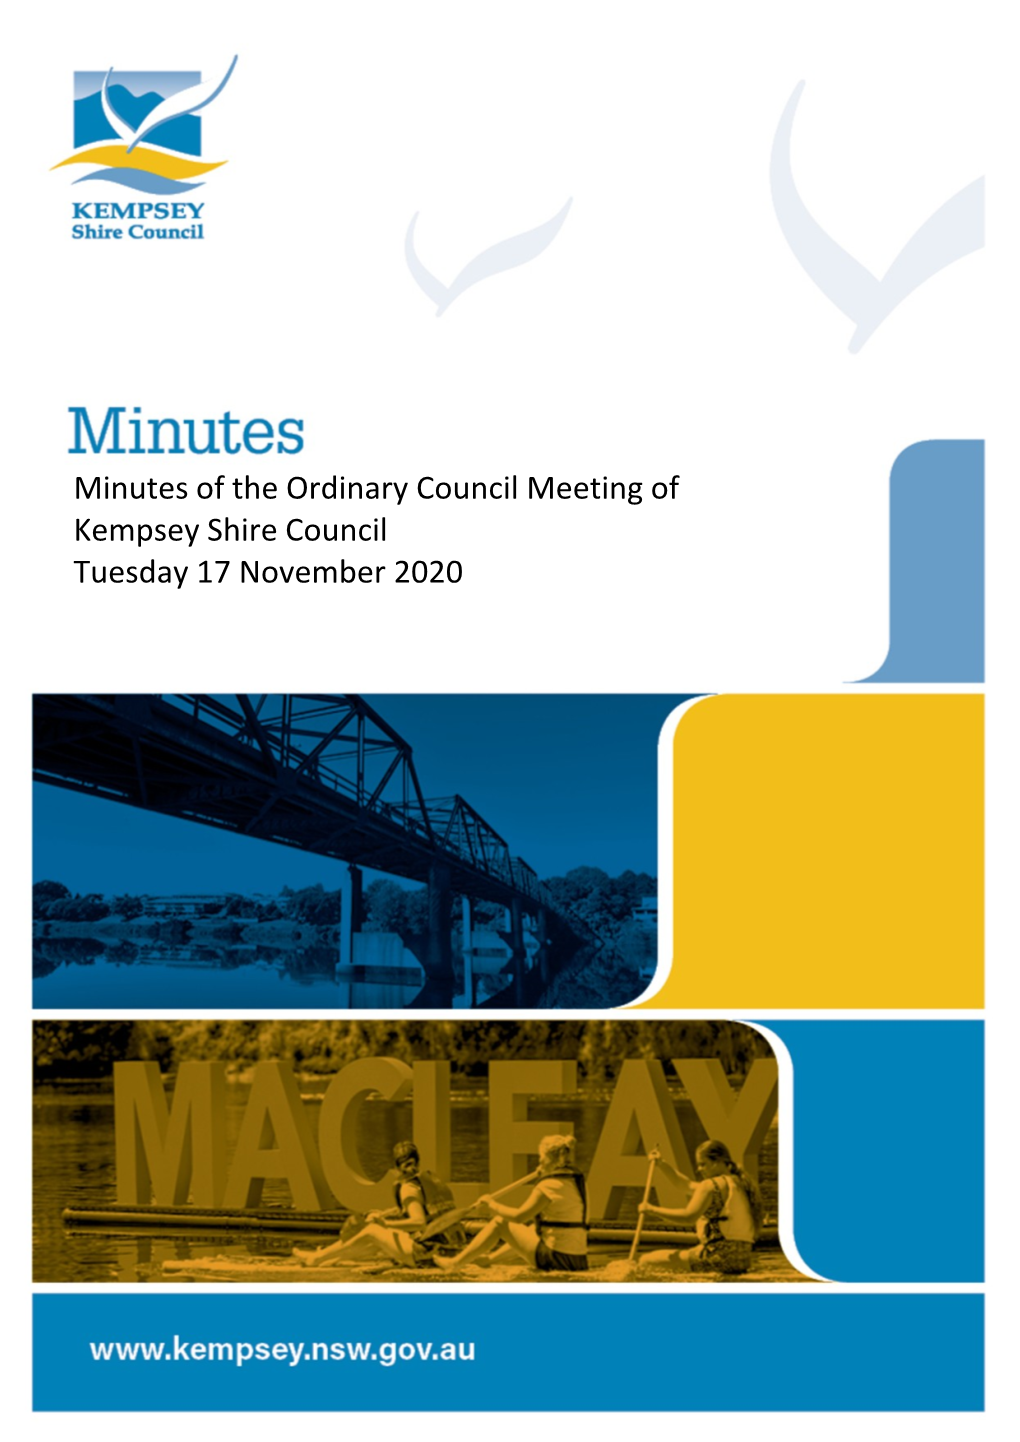 Minutes of the Ordinary Council Meeting of Kempsey Shire Council Tuesday 17 November 2020